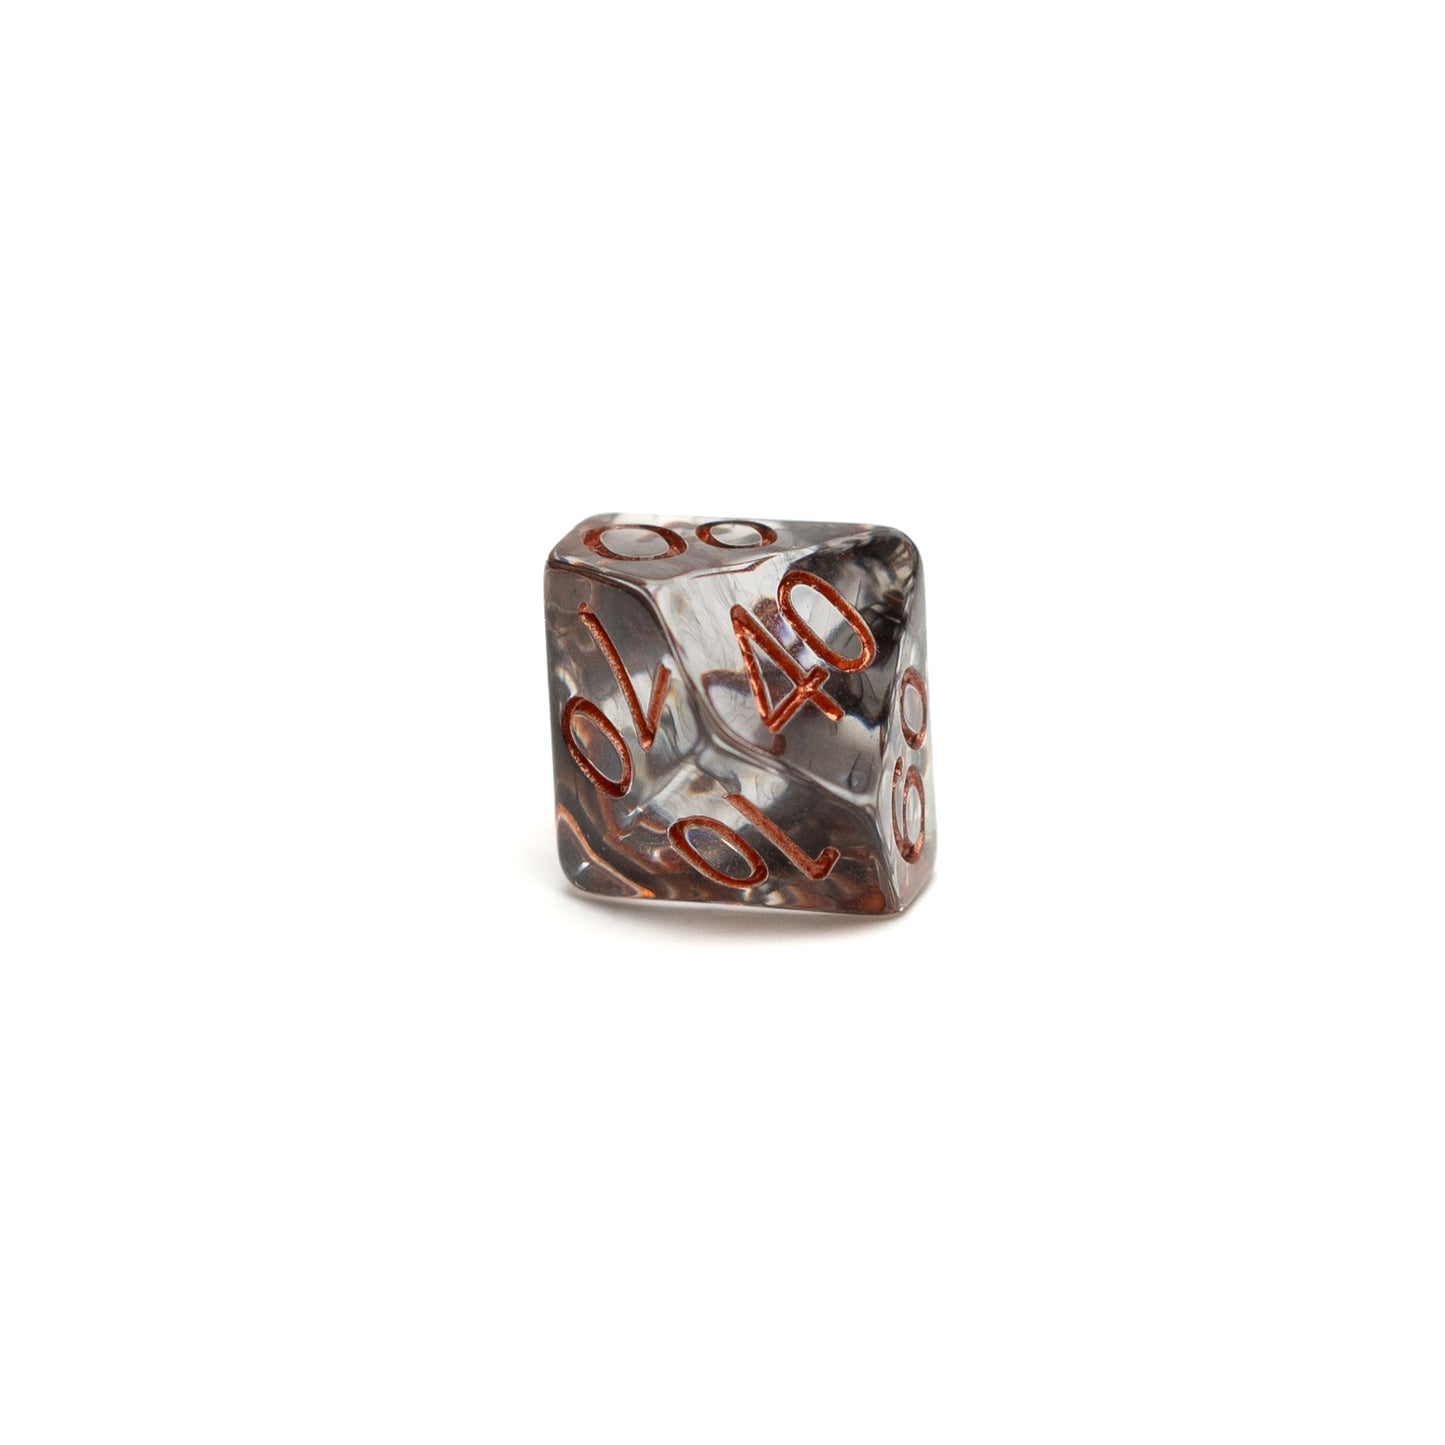 Roll Britannia Jeff Silverbow Dungeons and Dragons D10 Percentile Dice with Smoke and Fire Aesthetic